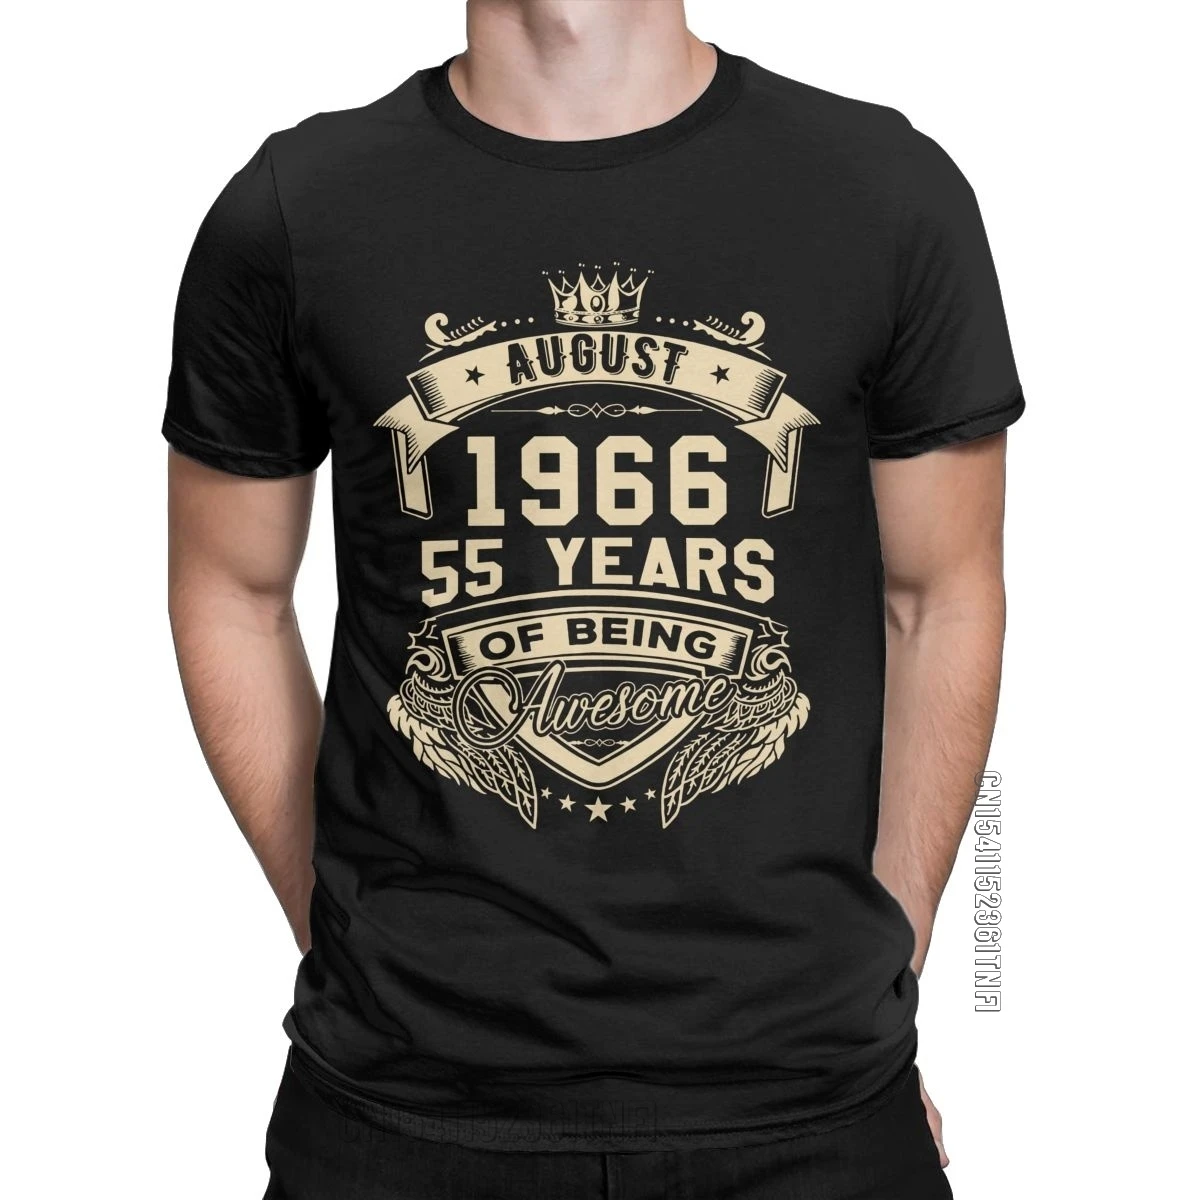 

Men's T-Shirt Born In August 1966 55 Years Of Being Awesome Humor Pure Cotton Tees Classic Short Sleeve T Shirts Round Neck Tops